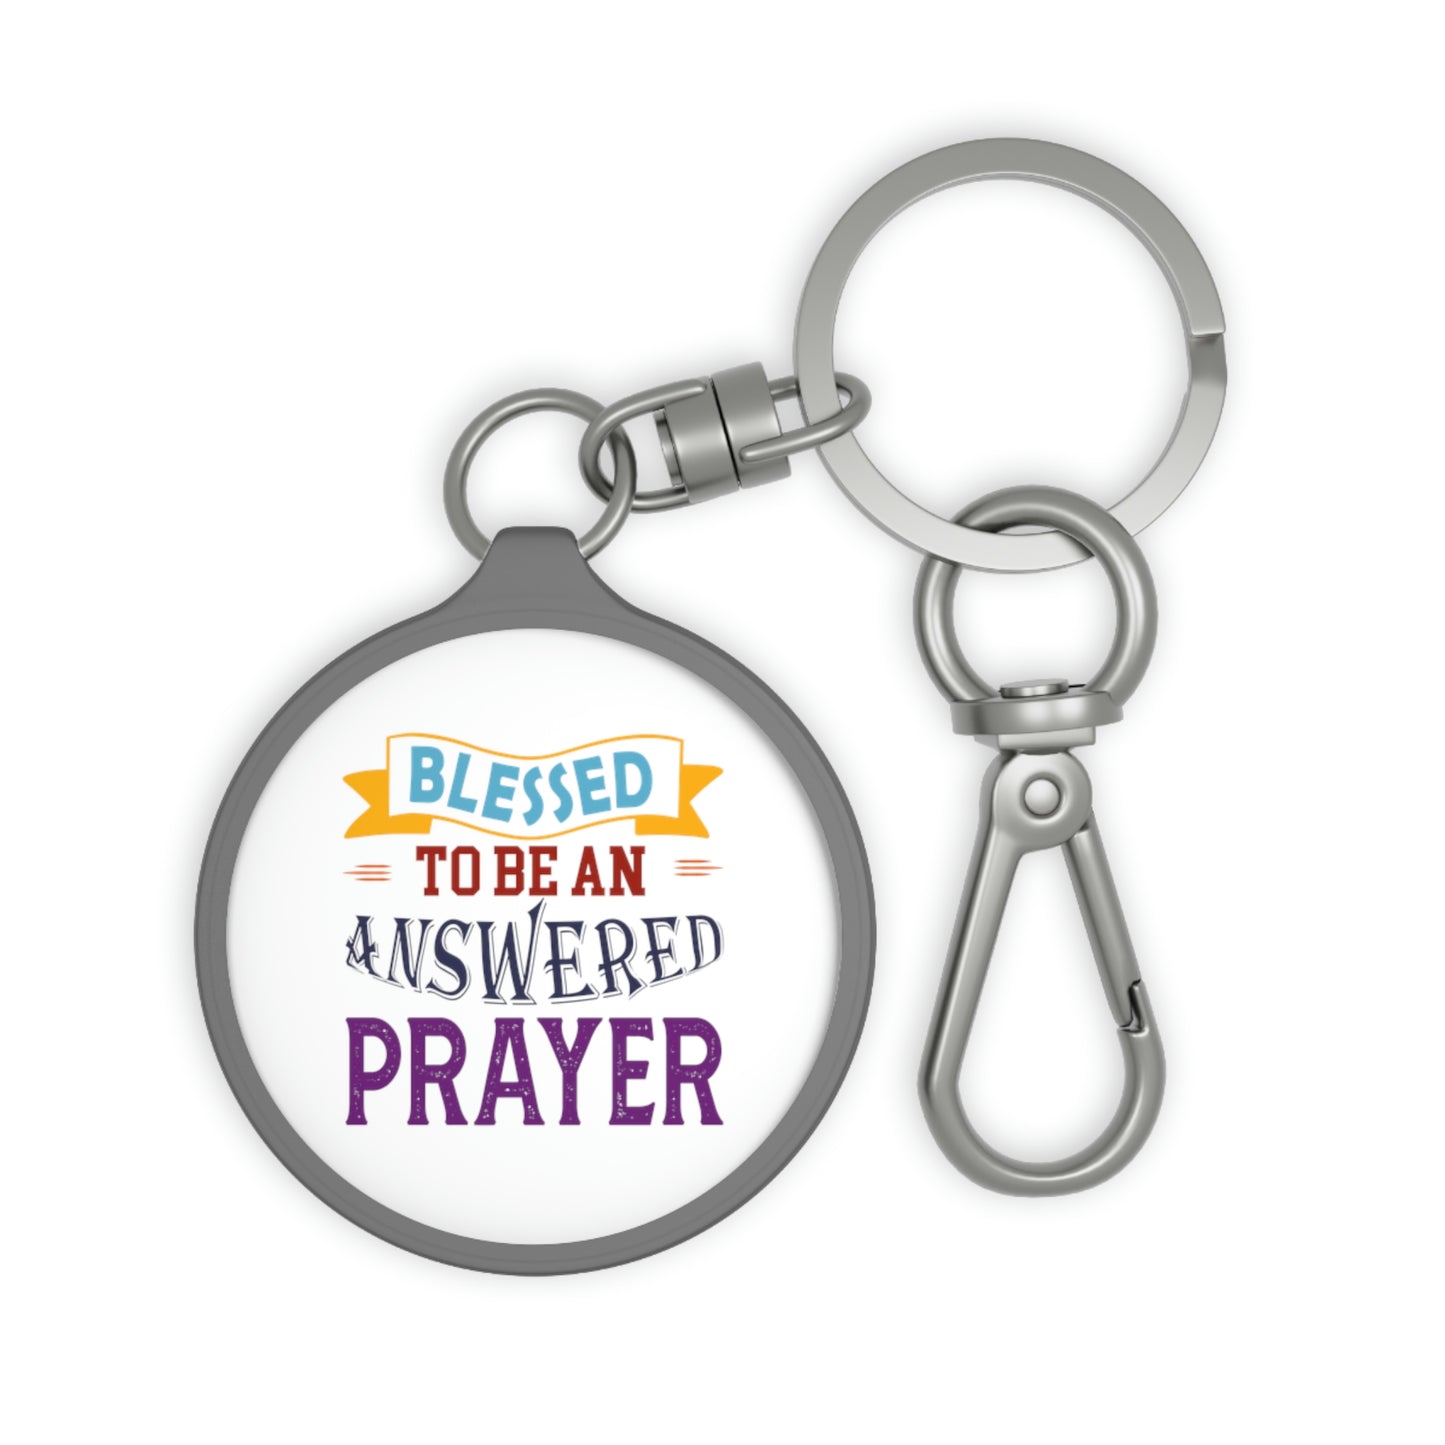 Blessed To Be An Answered Prayer Key Fob